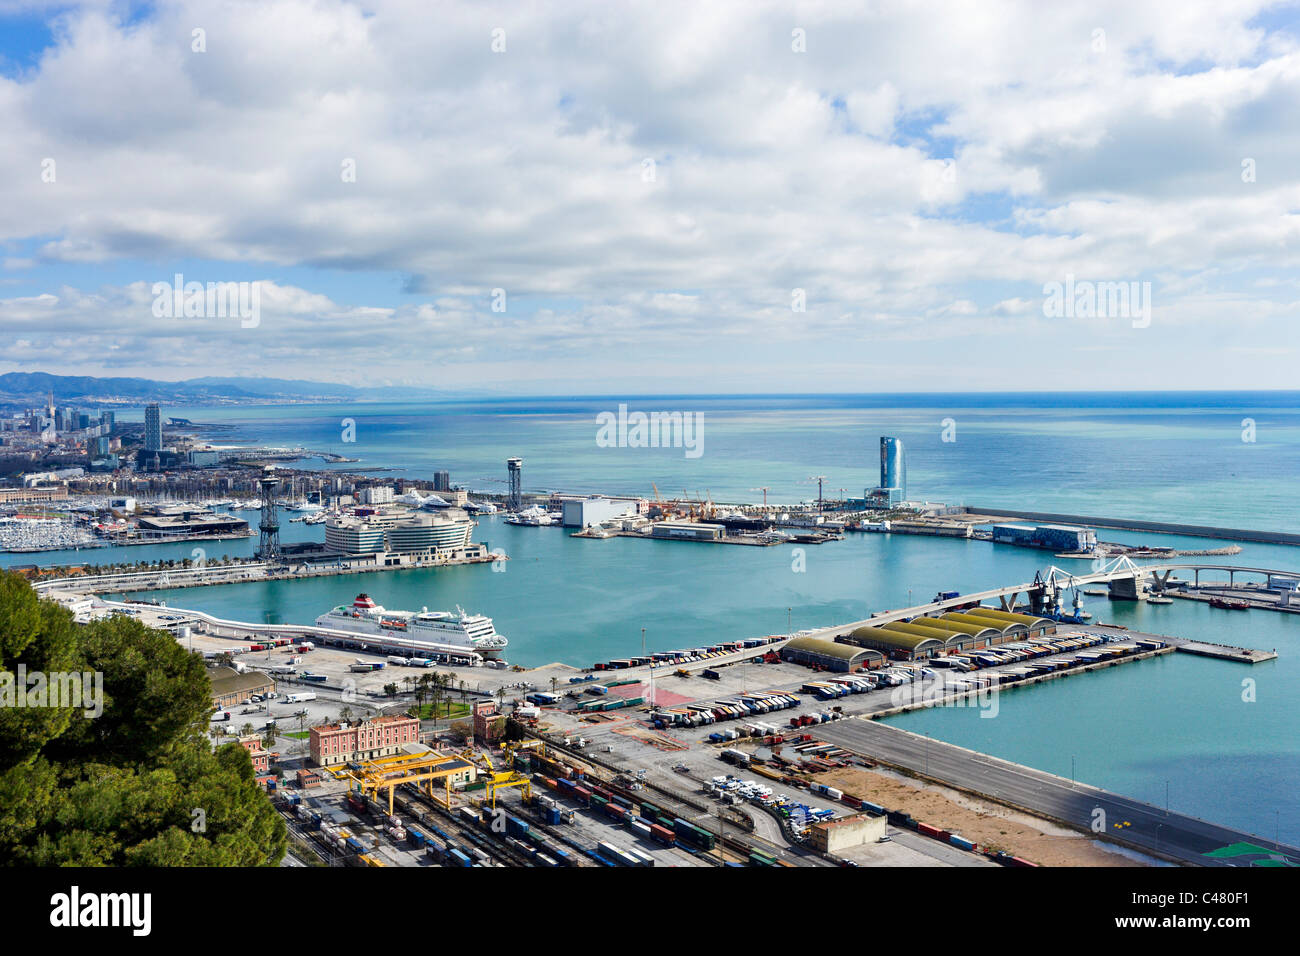 View over the Port of Barcelona from the Castell de Montjuic looking towards the Port Vell, Barcelona, Catalunya, Spain Stock Photo